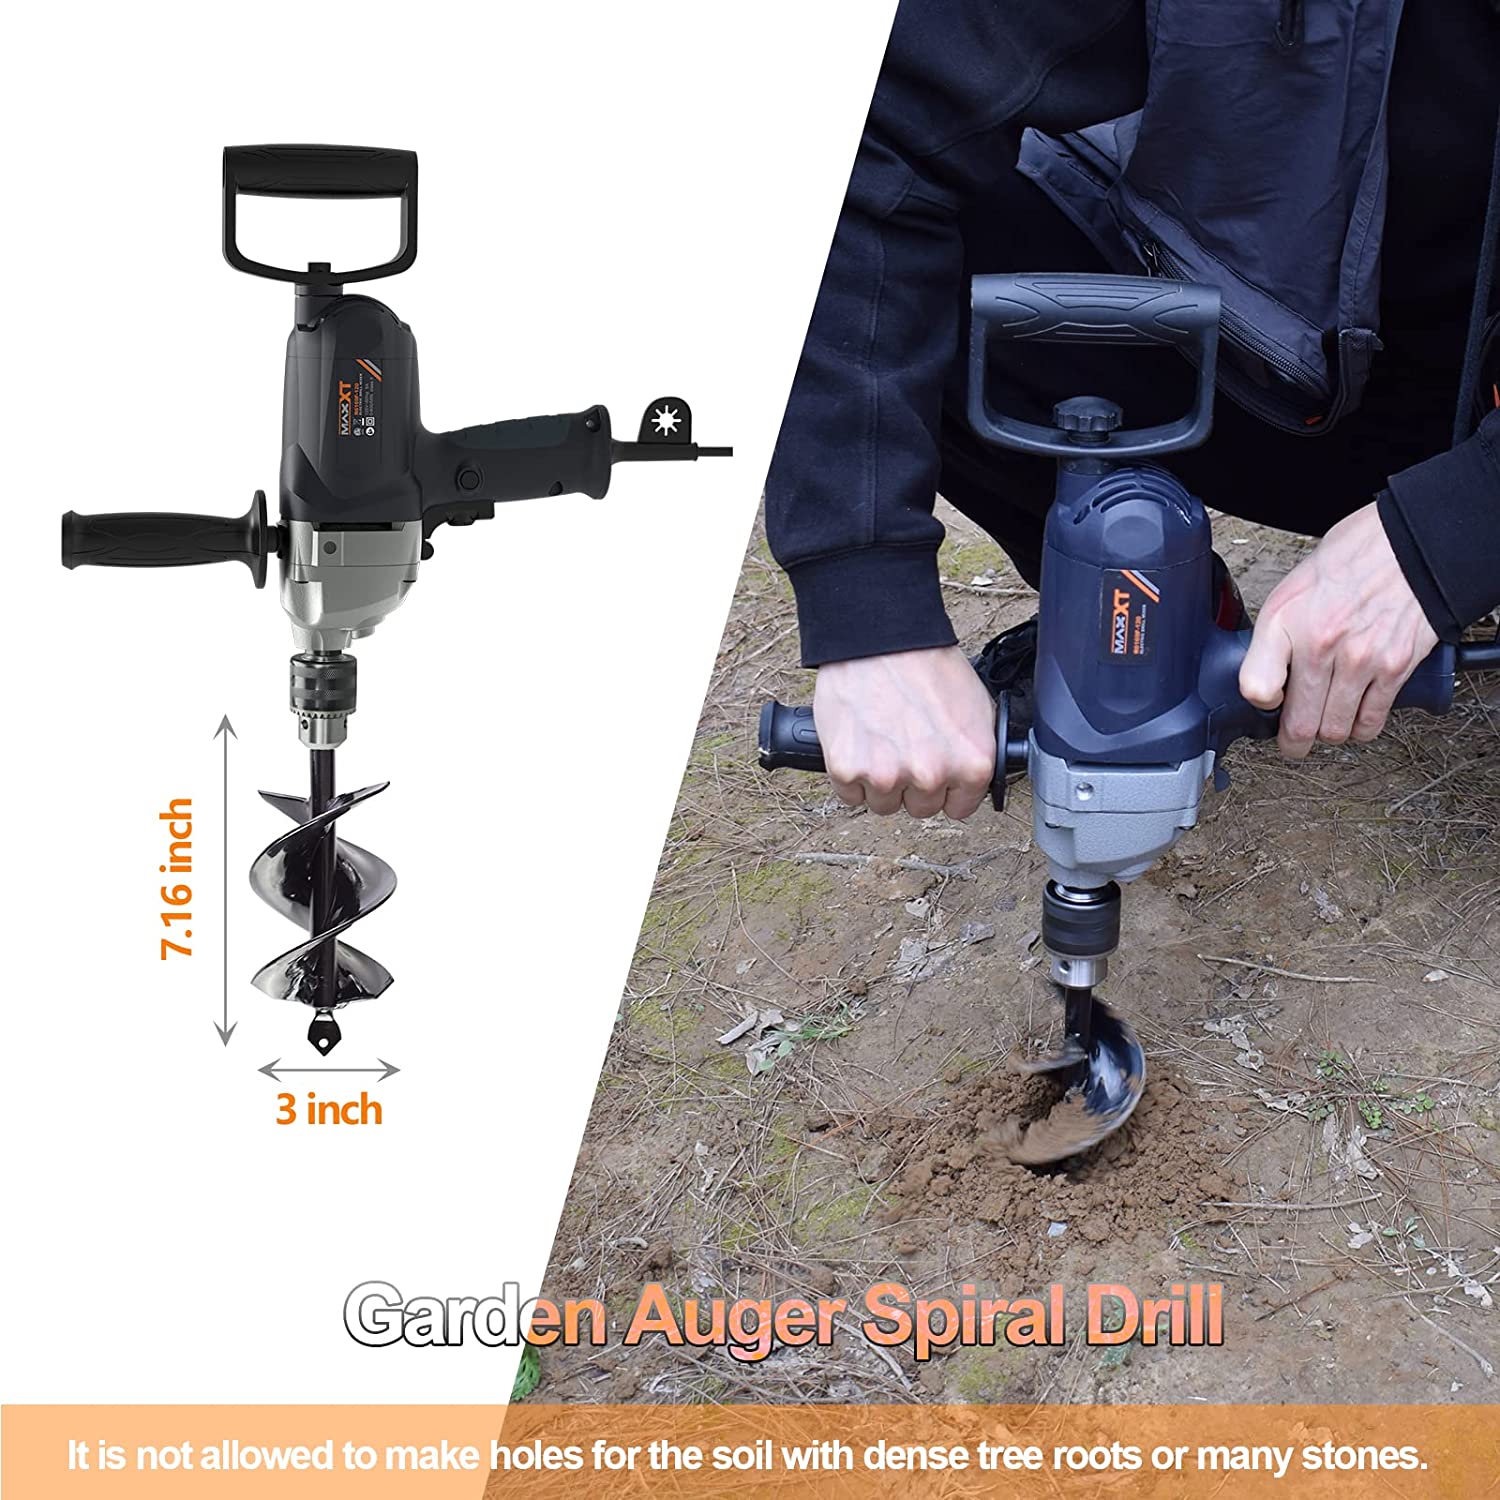 Small Cement Electric Drilling Slurry Mixer Handheld Electric